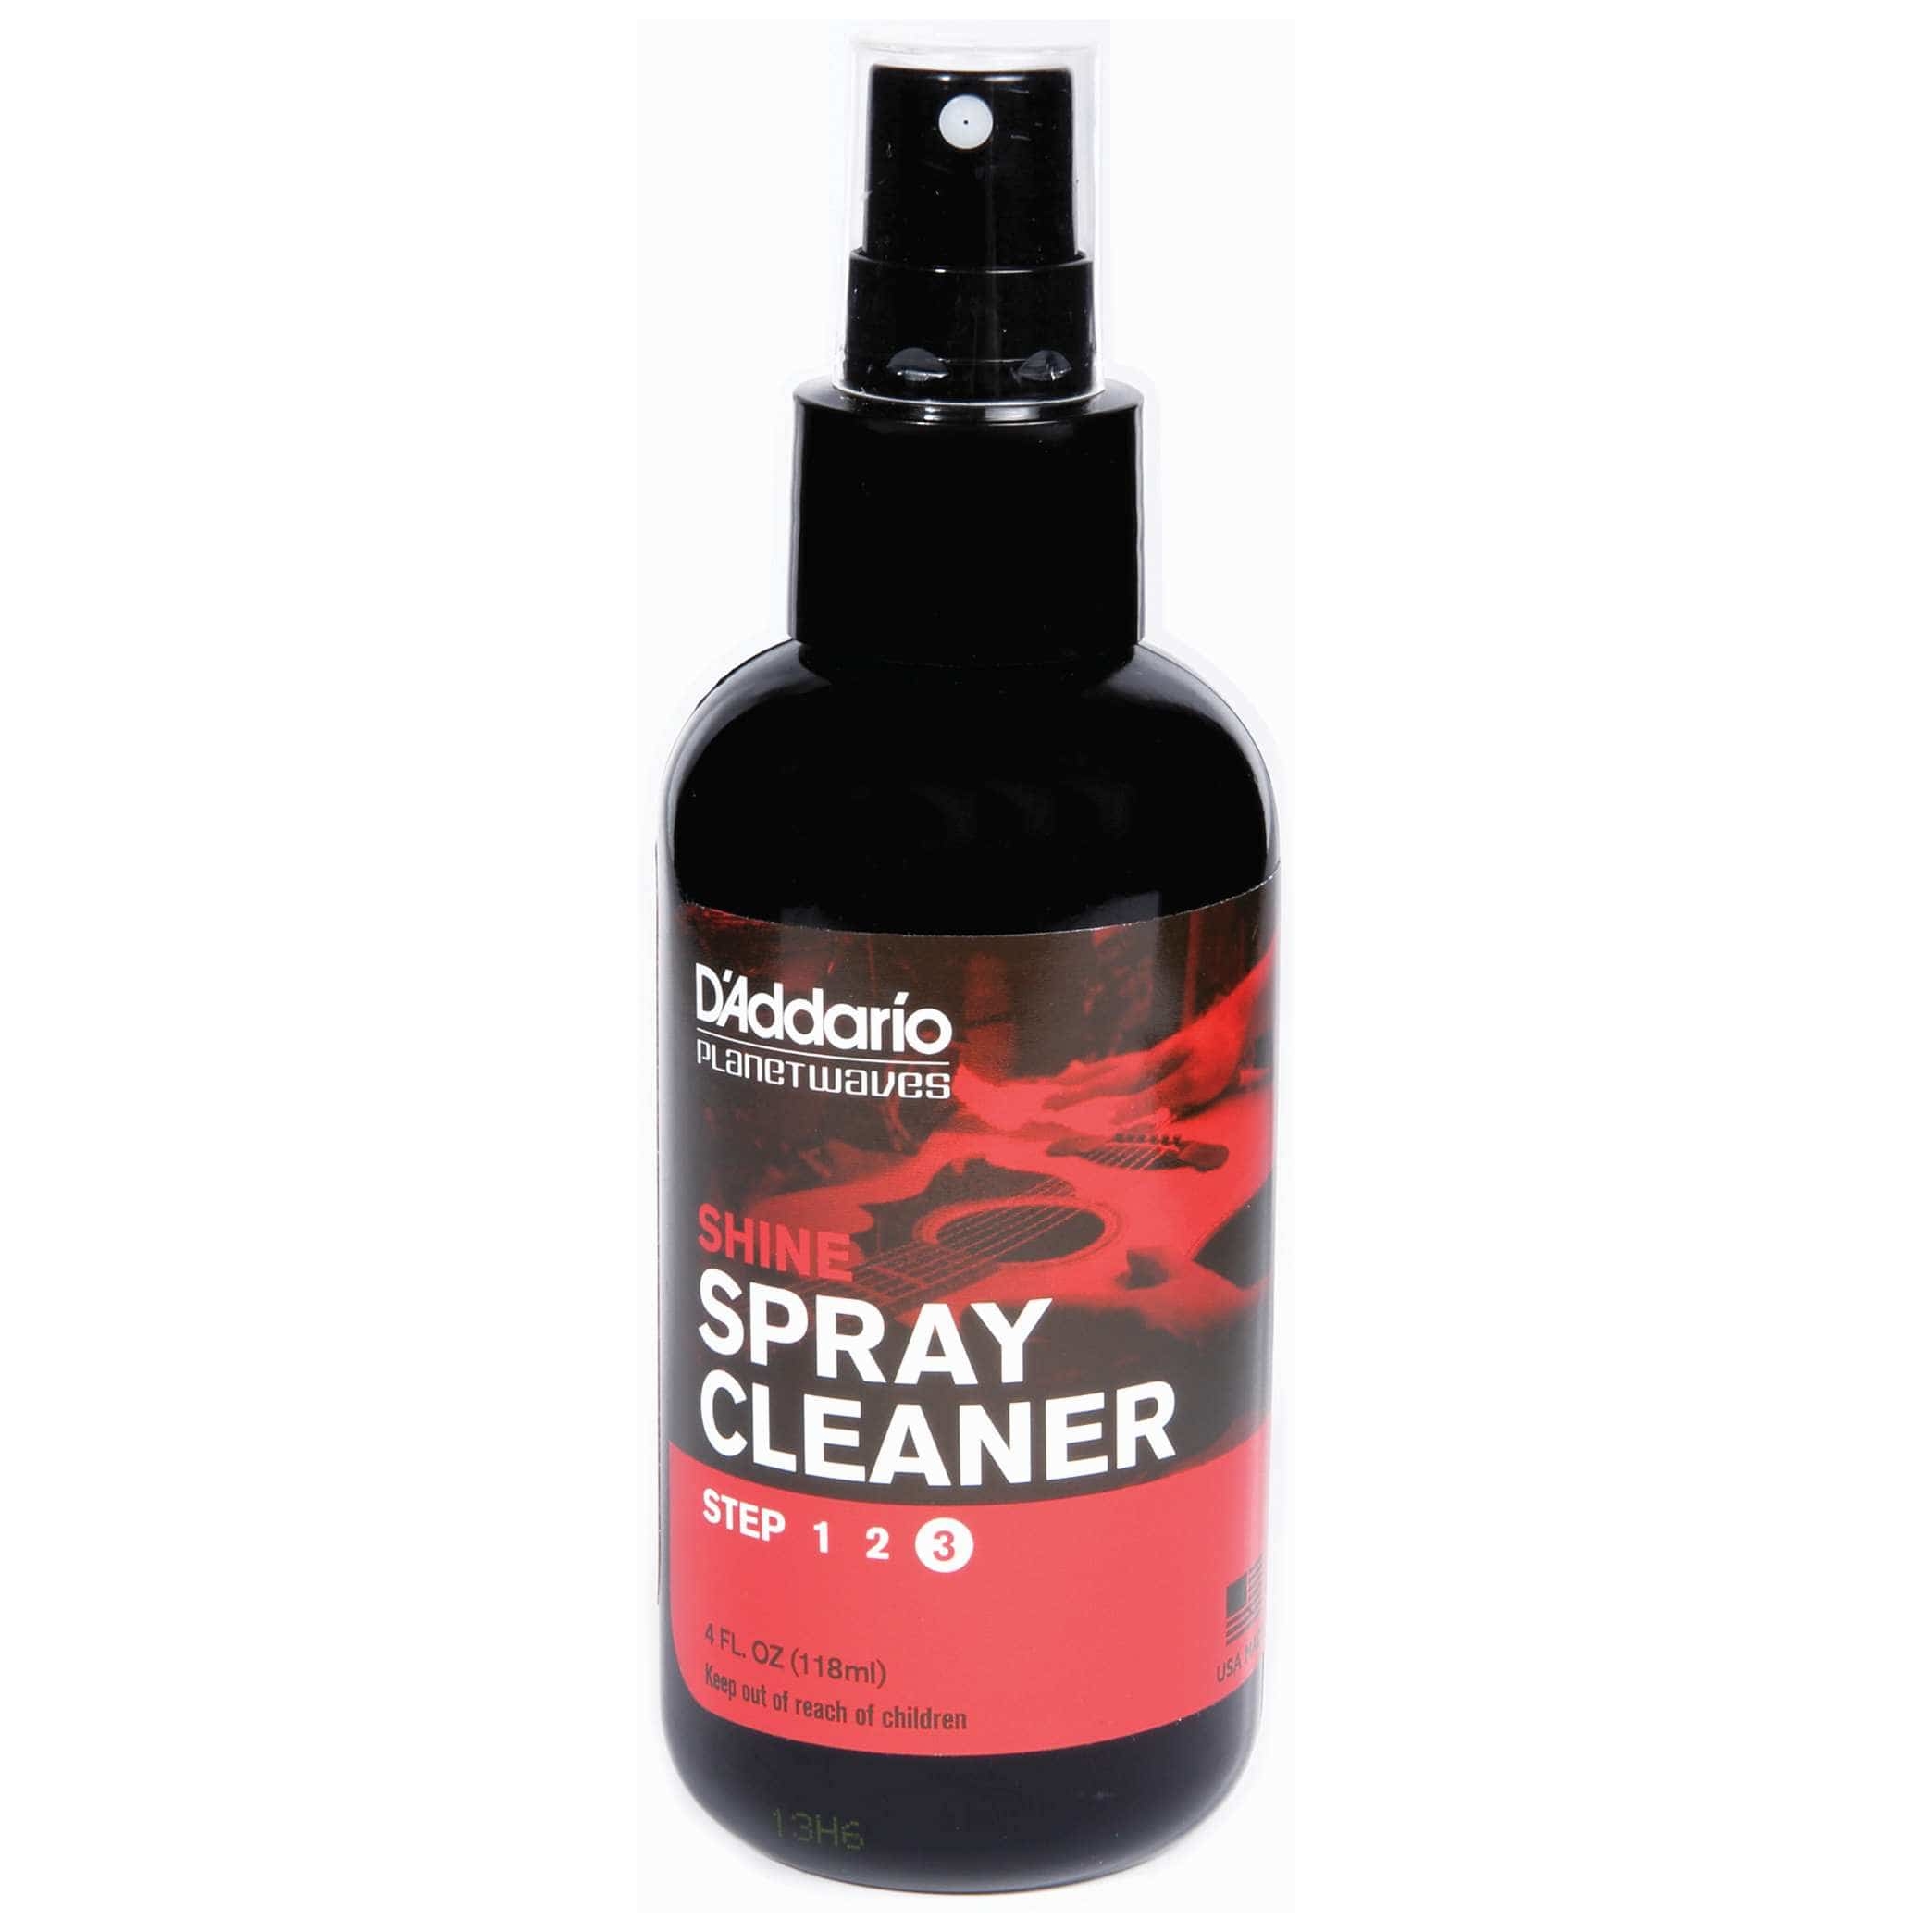 D’Addario PW-PL-03 - Shine Instant Spray Cleaner, Large